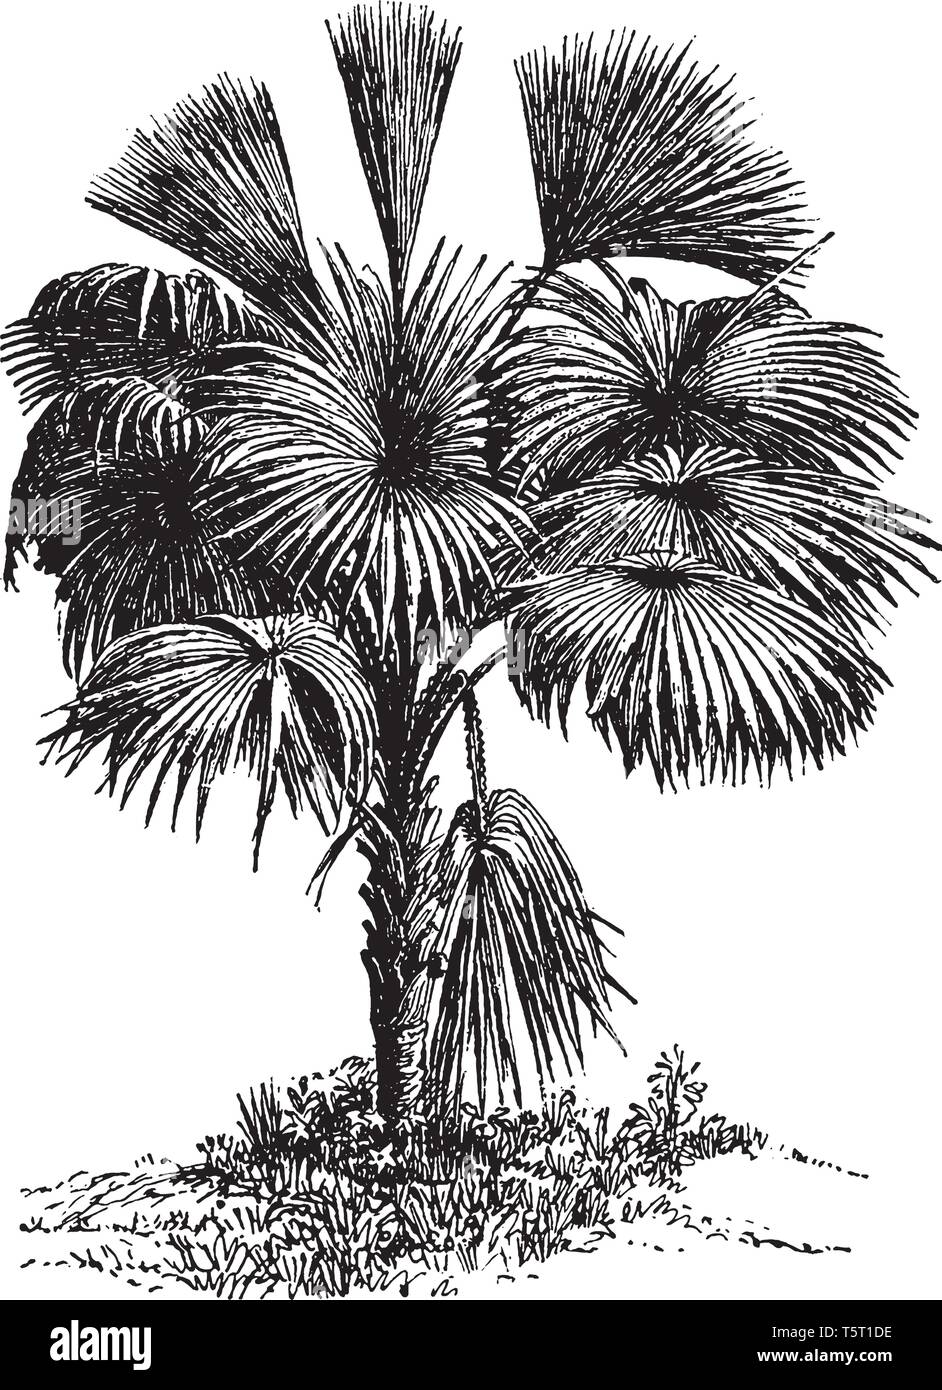 a picture of fan palm tree with huge fan shaped leaves such trees are native to the tropics vintage line drawing or engraving illustration T5T1DE